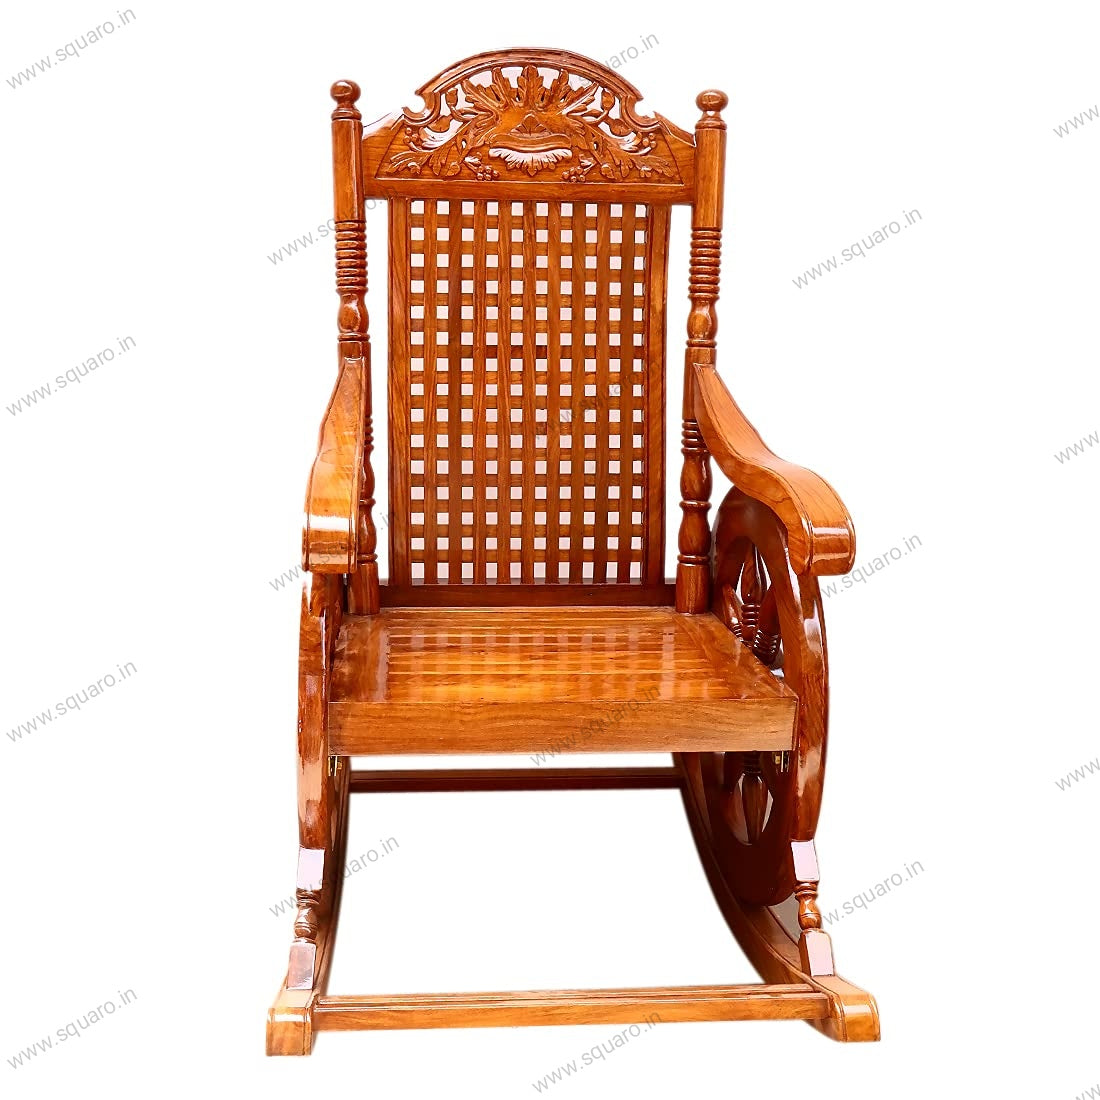 Sheesham Handcrafted Wooden Rocking Chair Wooden armrest Chair with Back Support for Living Room